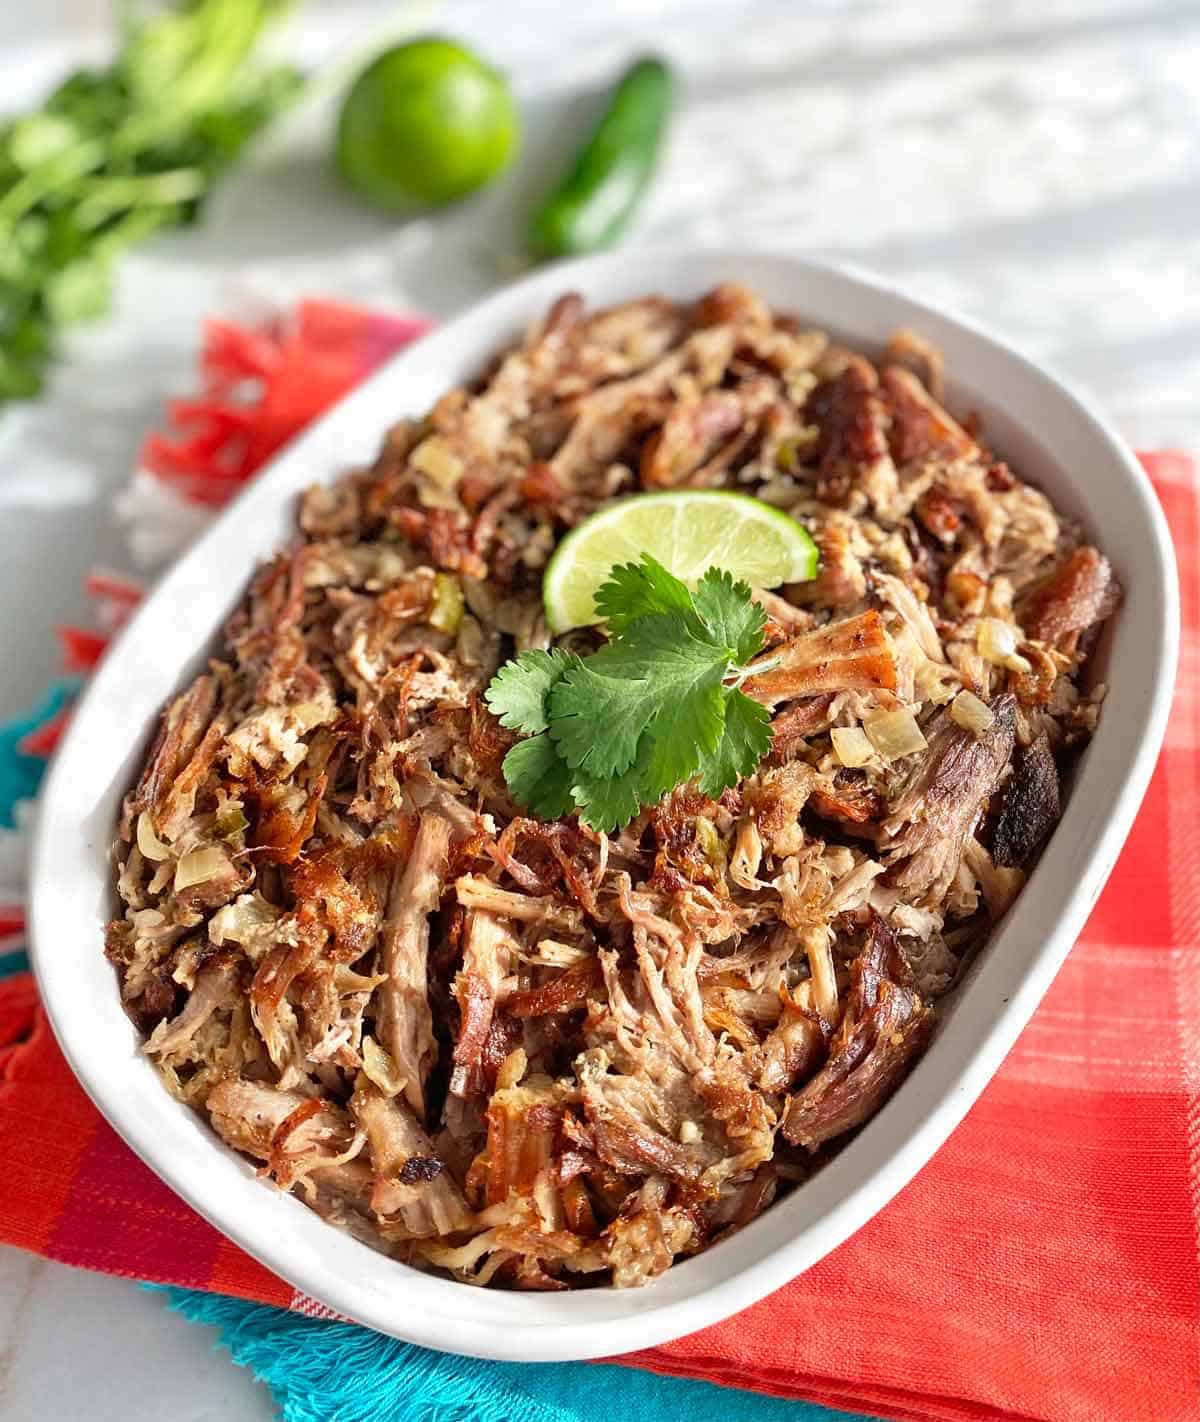 Mexican Carnitas cooked in the crock pot in a serving dish atop bright colored napkins.